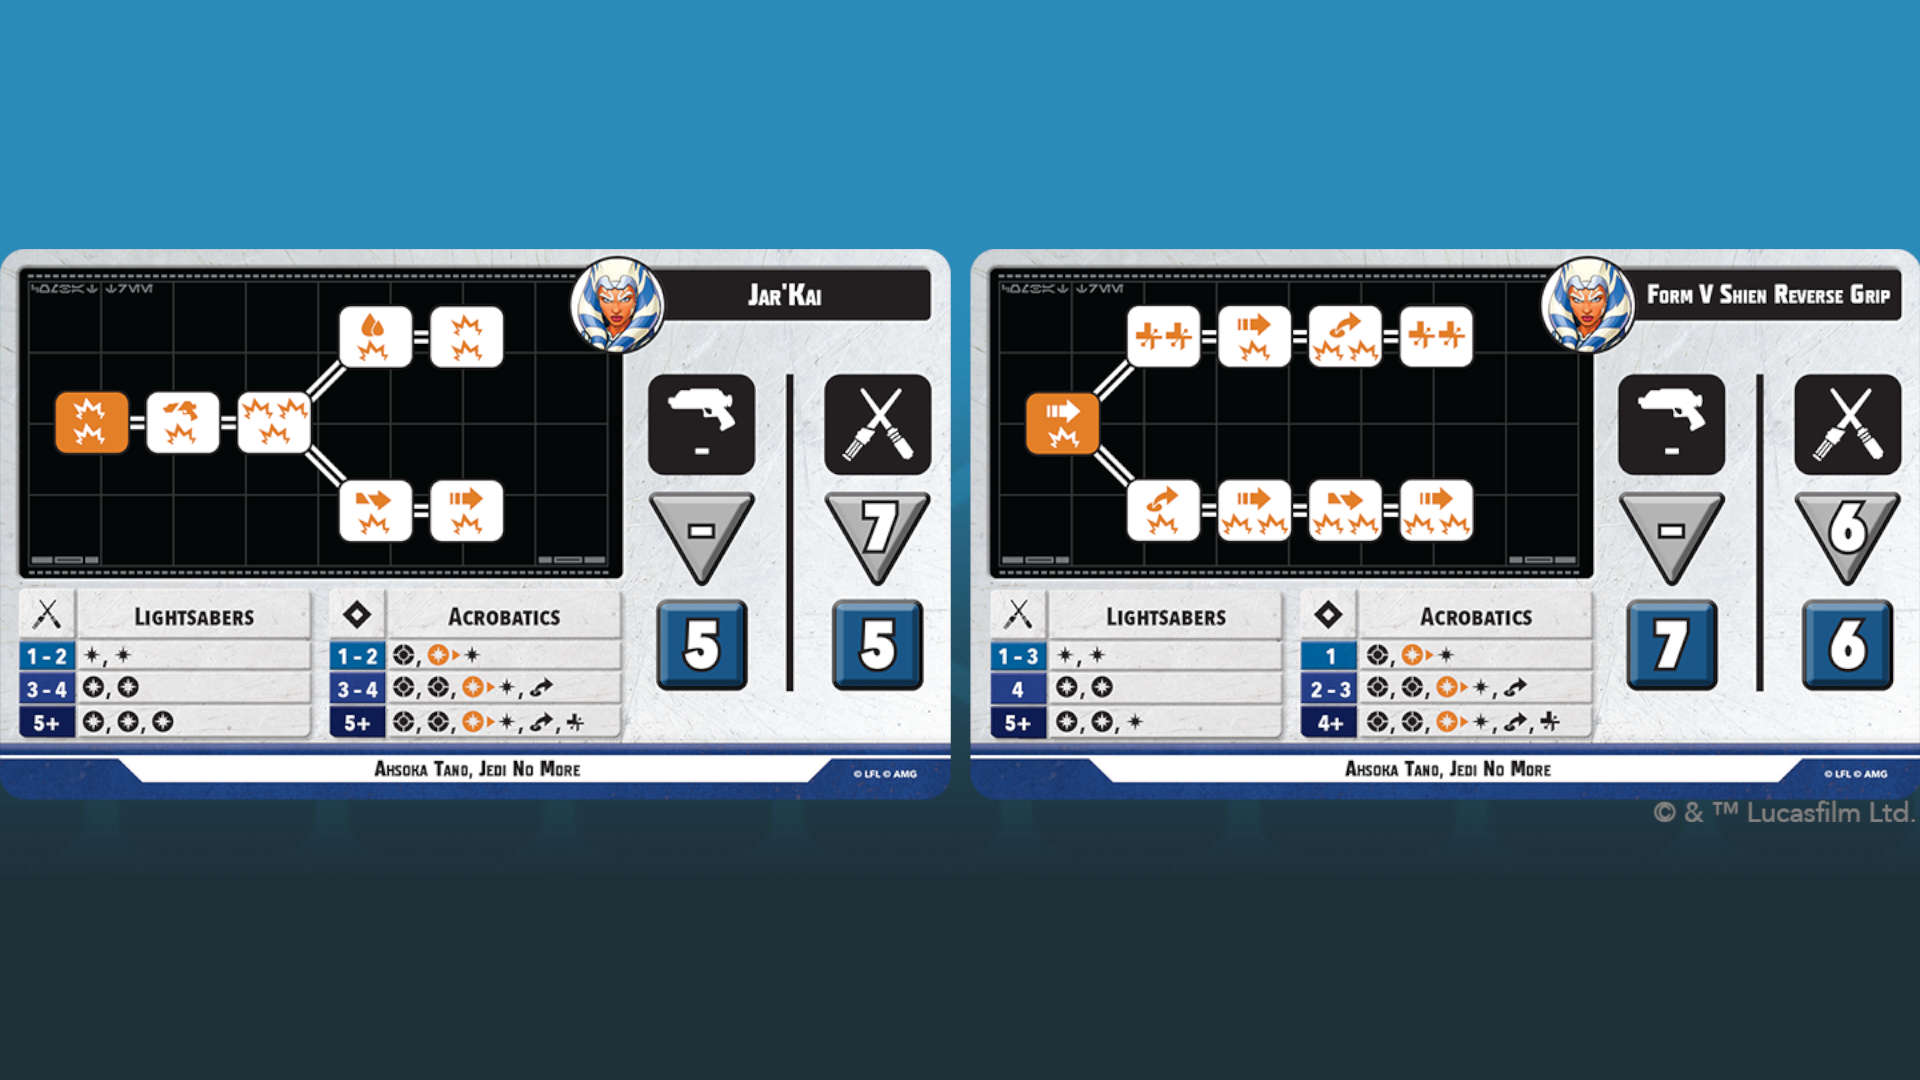 Star Wars Shatterpoint - graphics by Atomic Mass Games, Ahsoka Tano's stance cards with combat trees